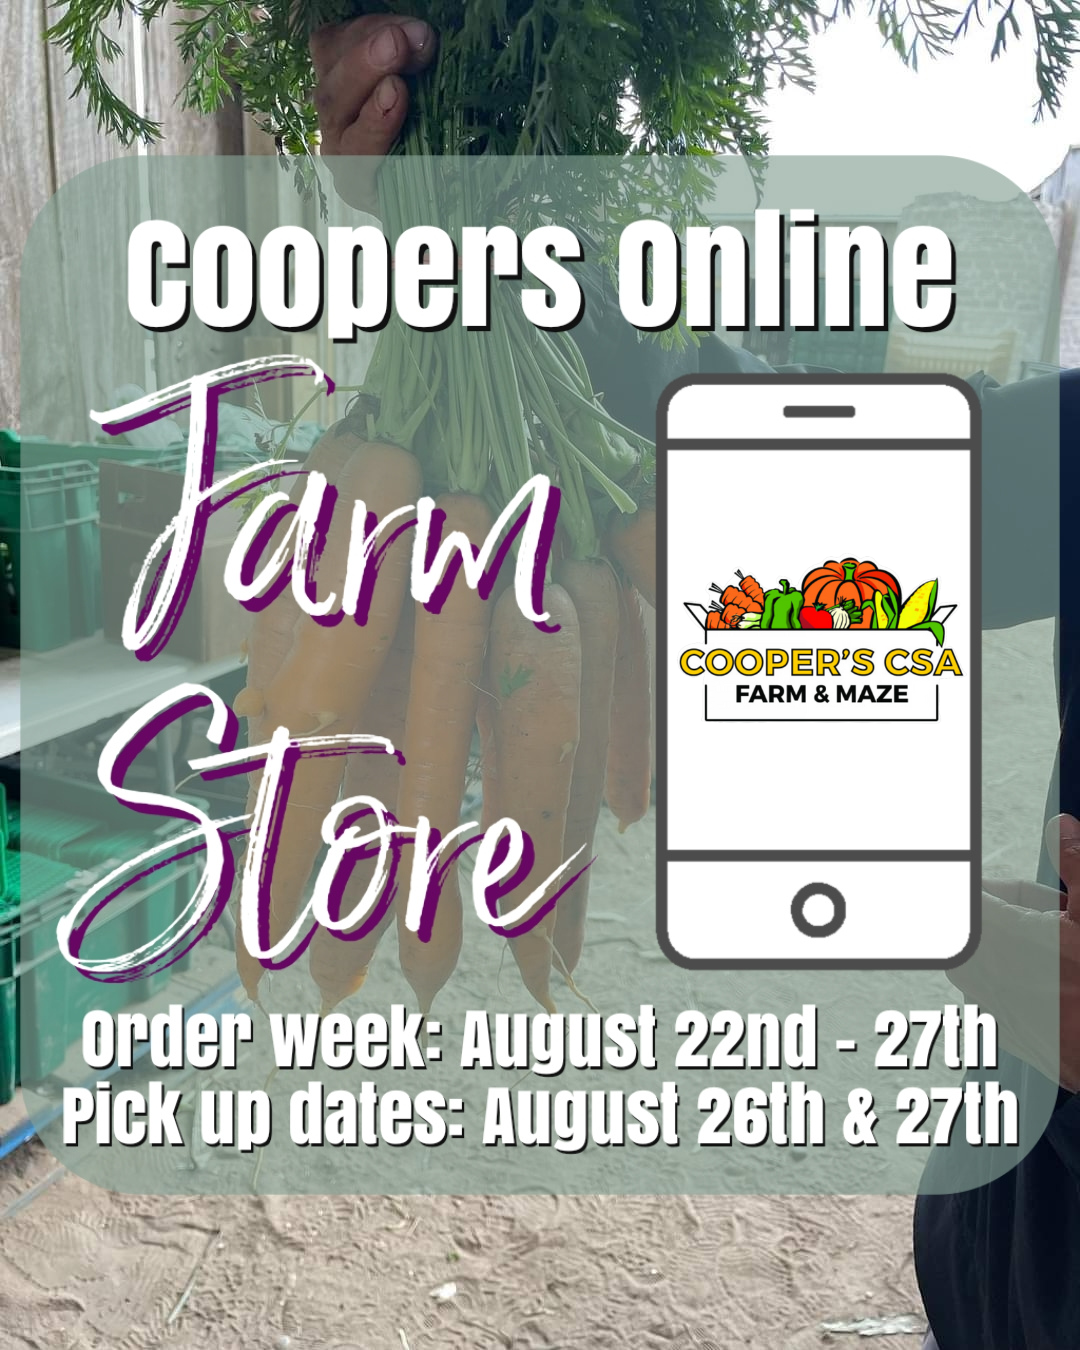 Previous Happening: Coopers Farm Stand: Order Week August 22-27th